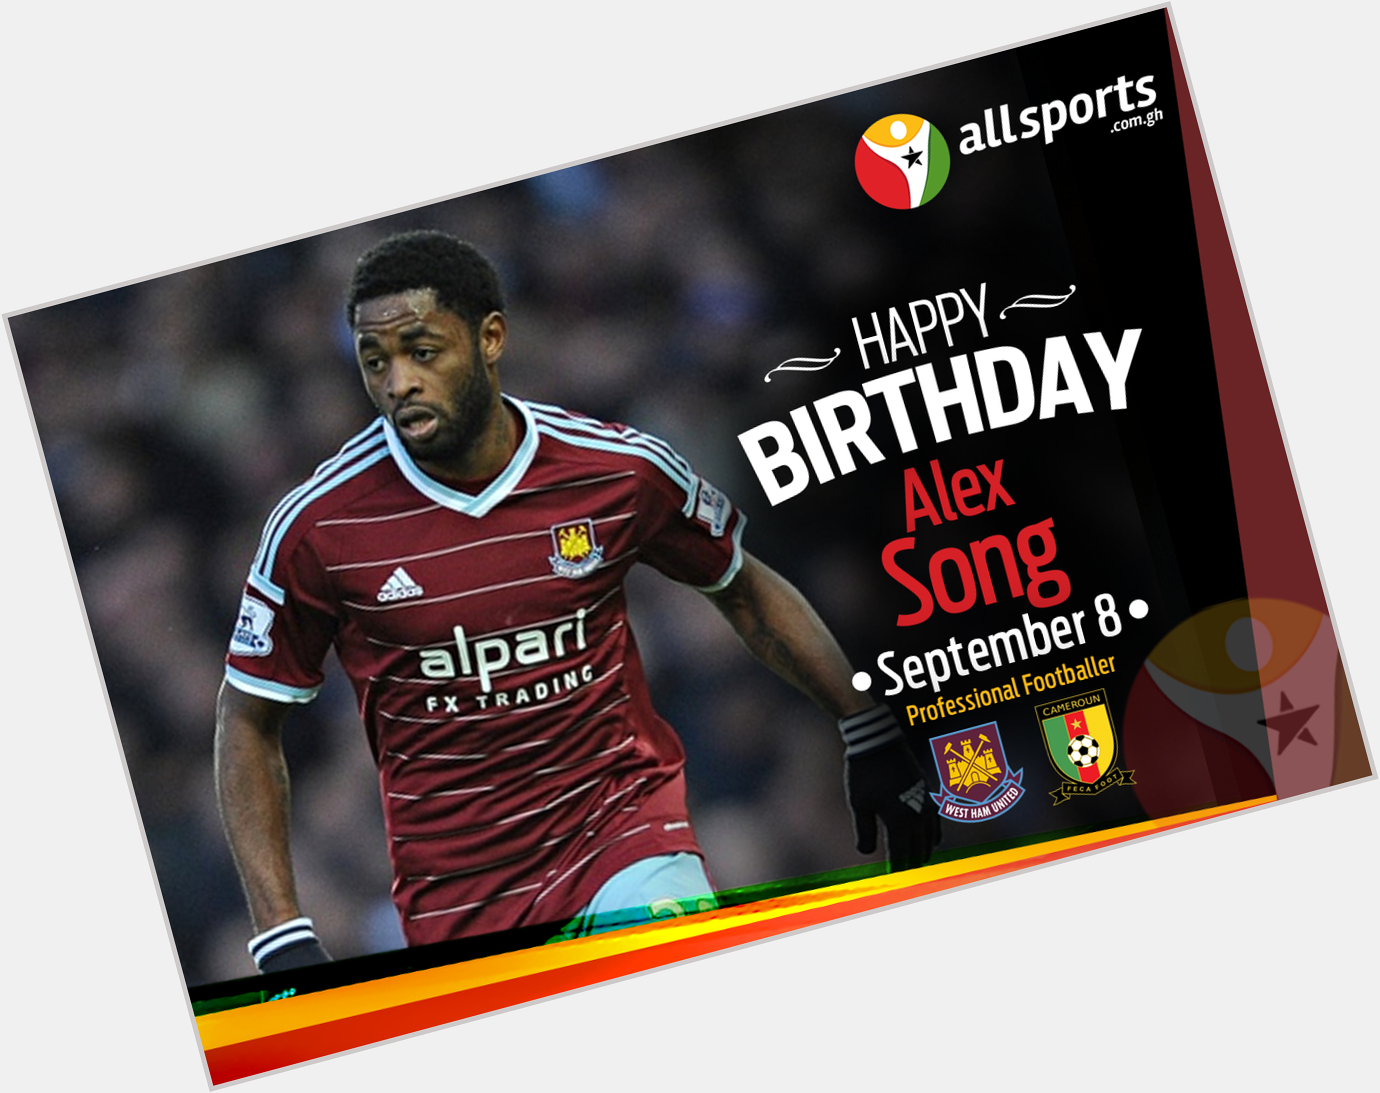 AllSportsGh wishes and midfielder, Alex Song a HAPPY BIRTHDAY as he turns 27 today. 